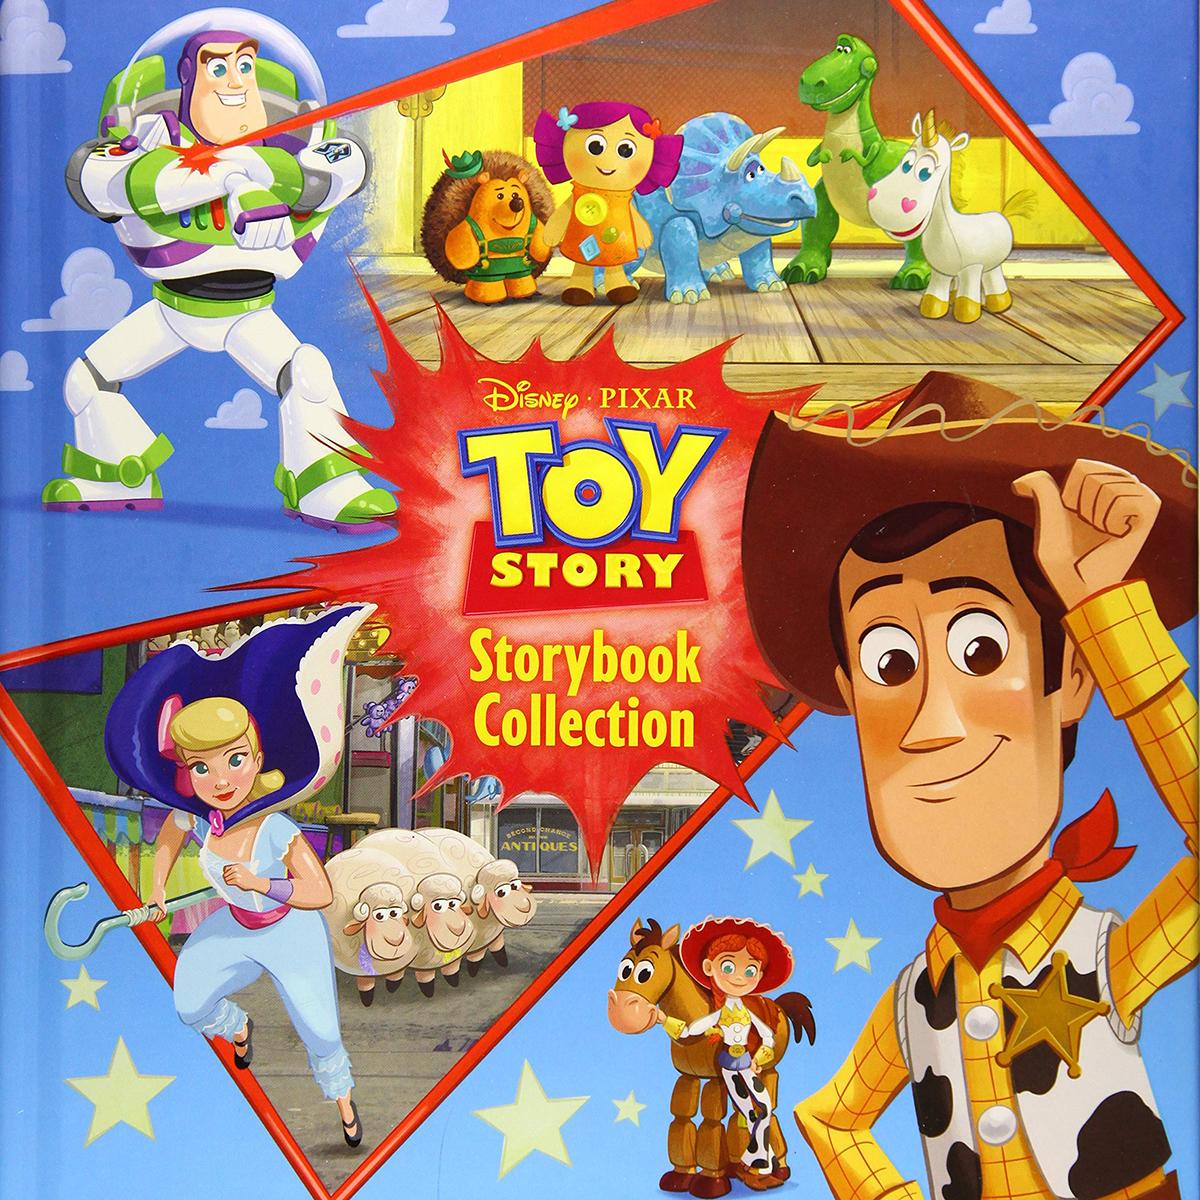 Disney Pixar Toy Story Storybook Collection Hardcover for $6.46